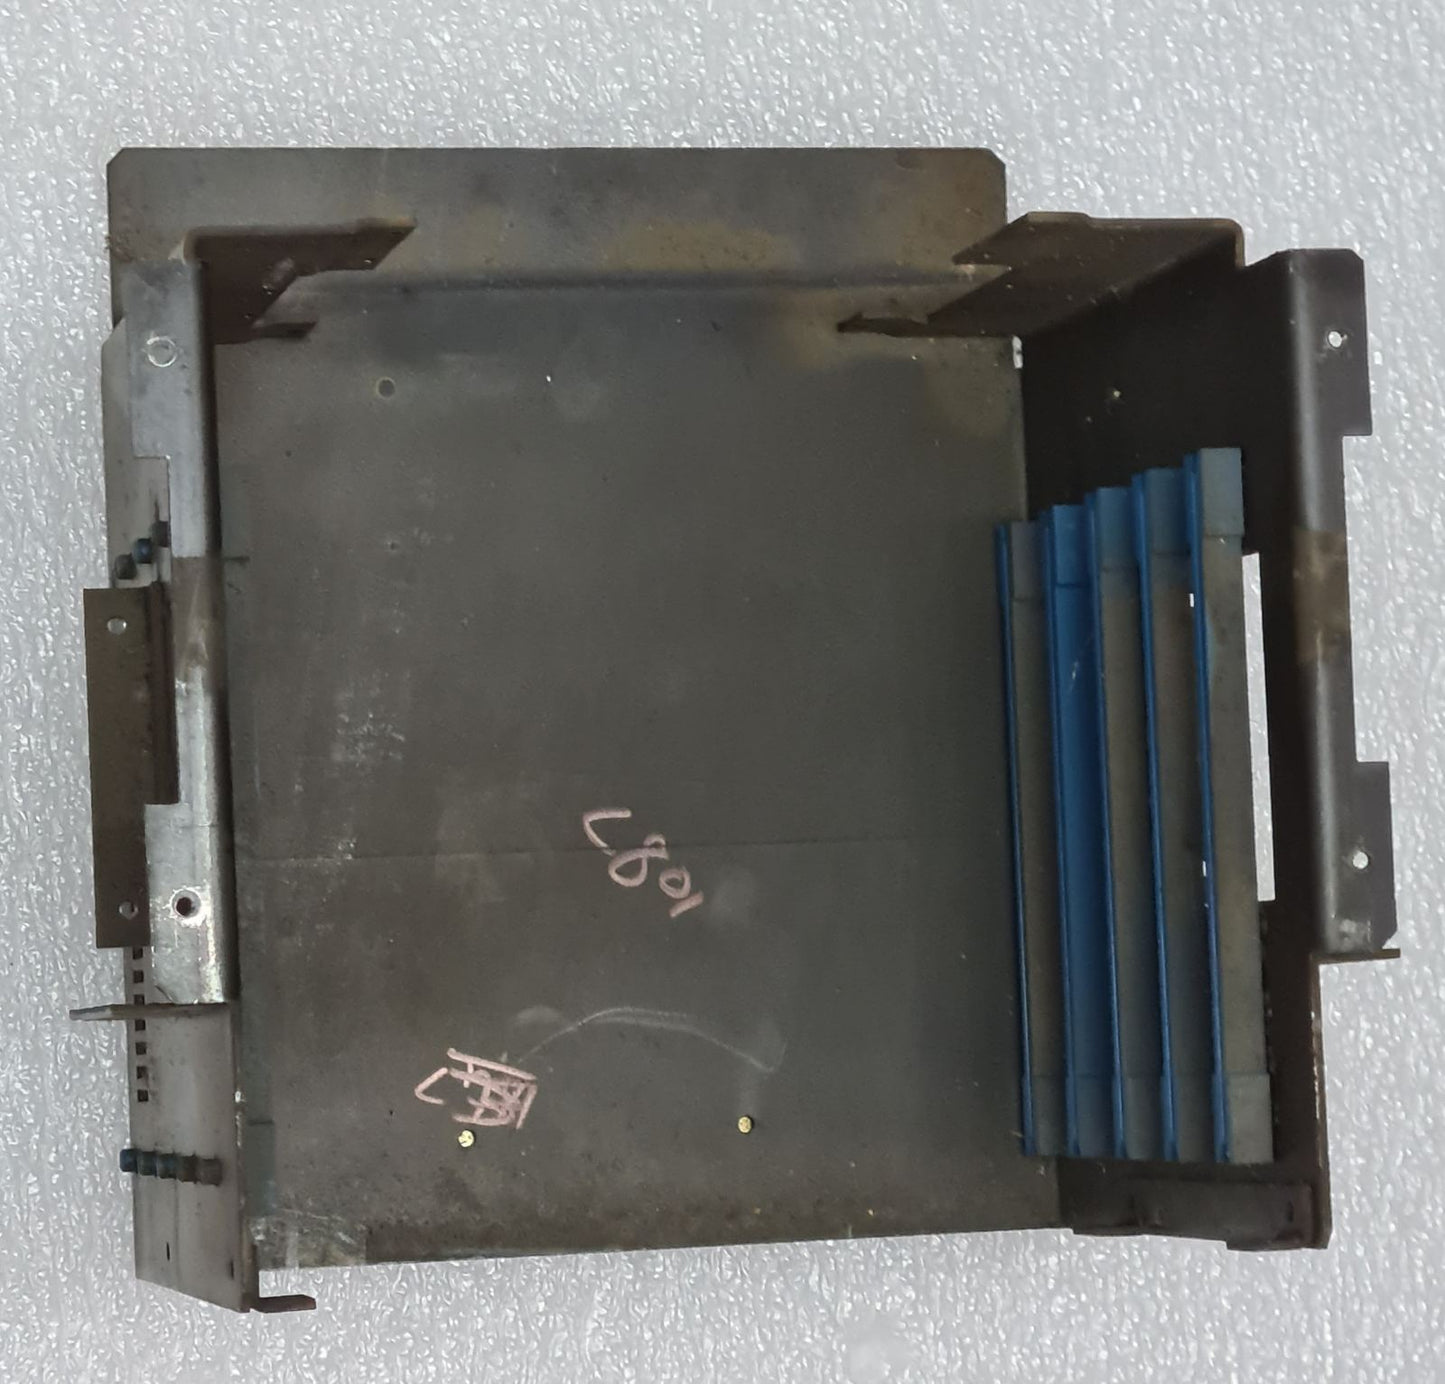 Teac 85-16 top pcb cage